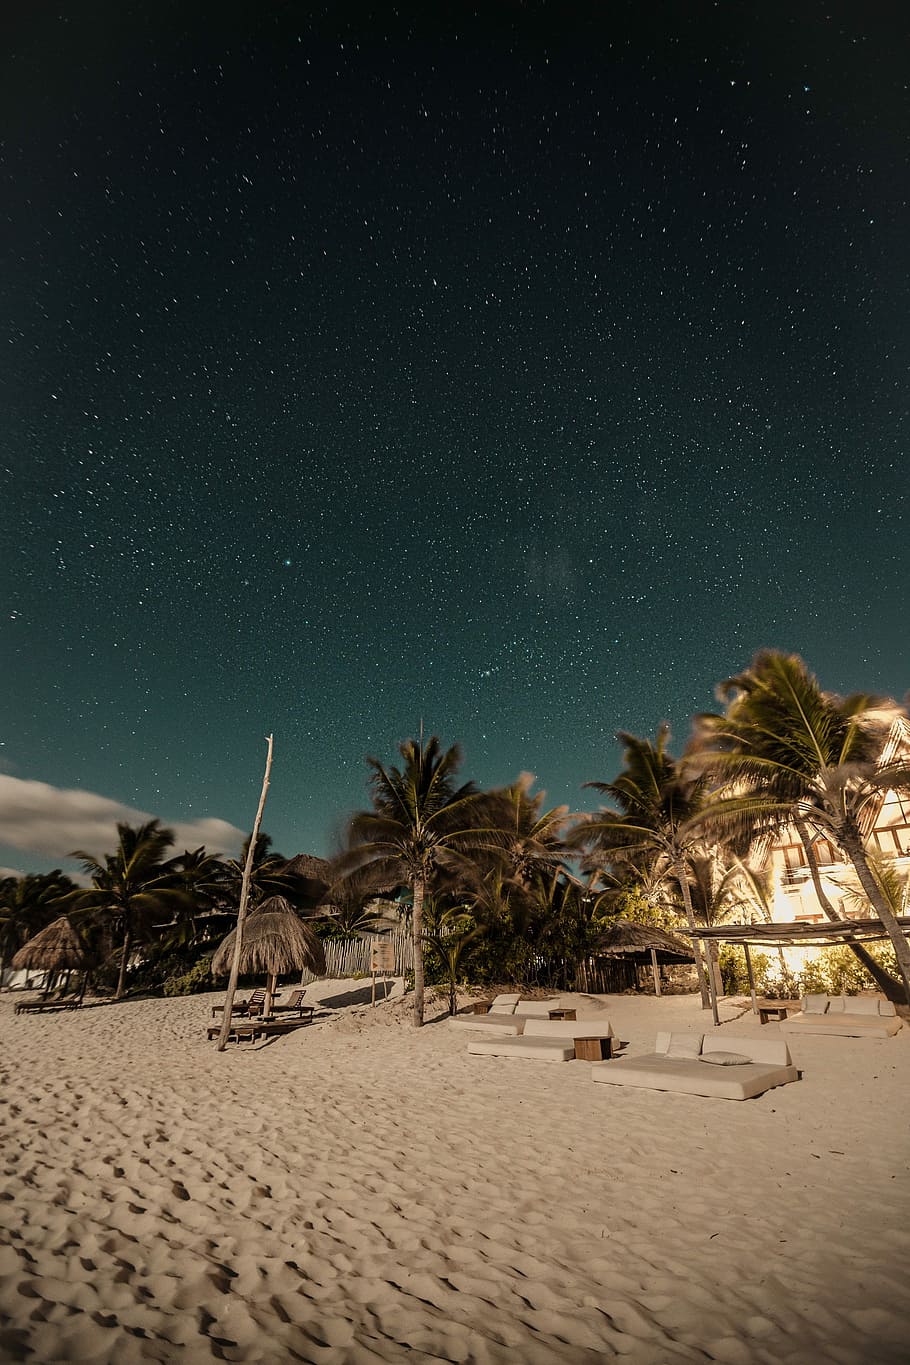 seashore and palm trees under starry sky, several gray loungers surrounded by palm trees on white sand